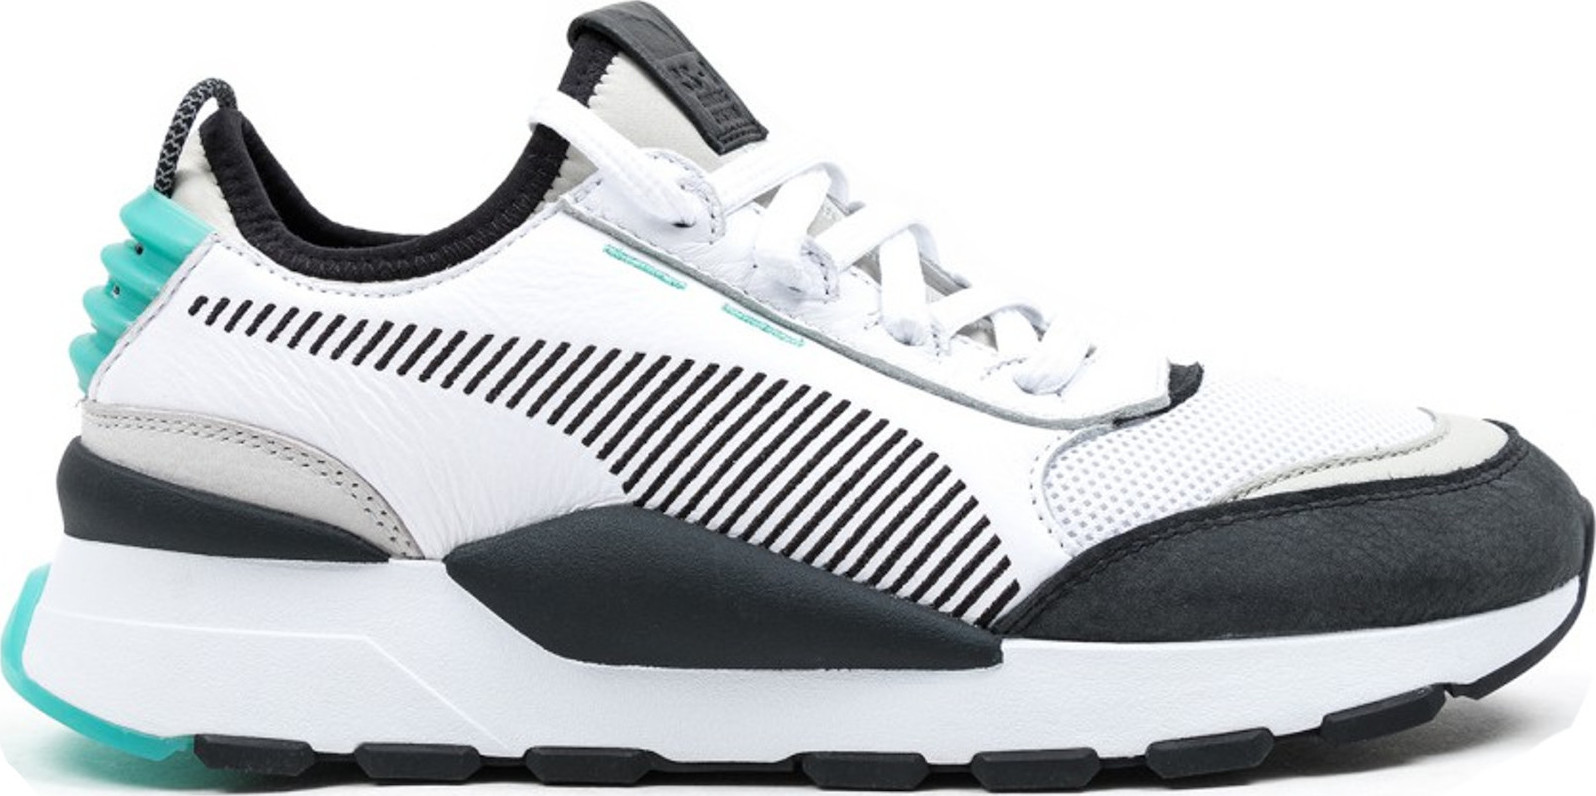 puma sneakers skroutz, OFF 70%,Cheap!